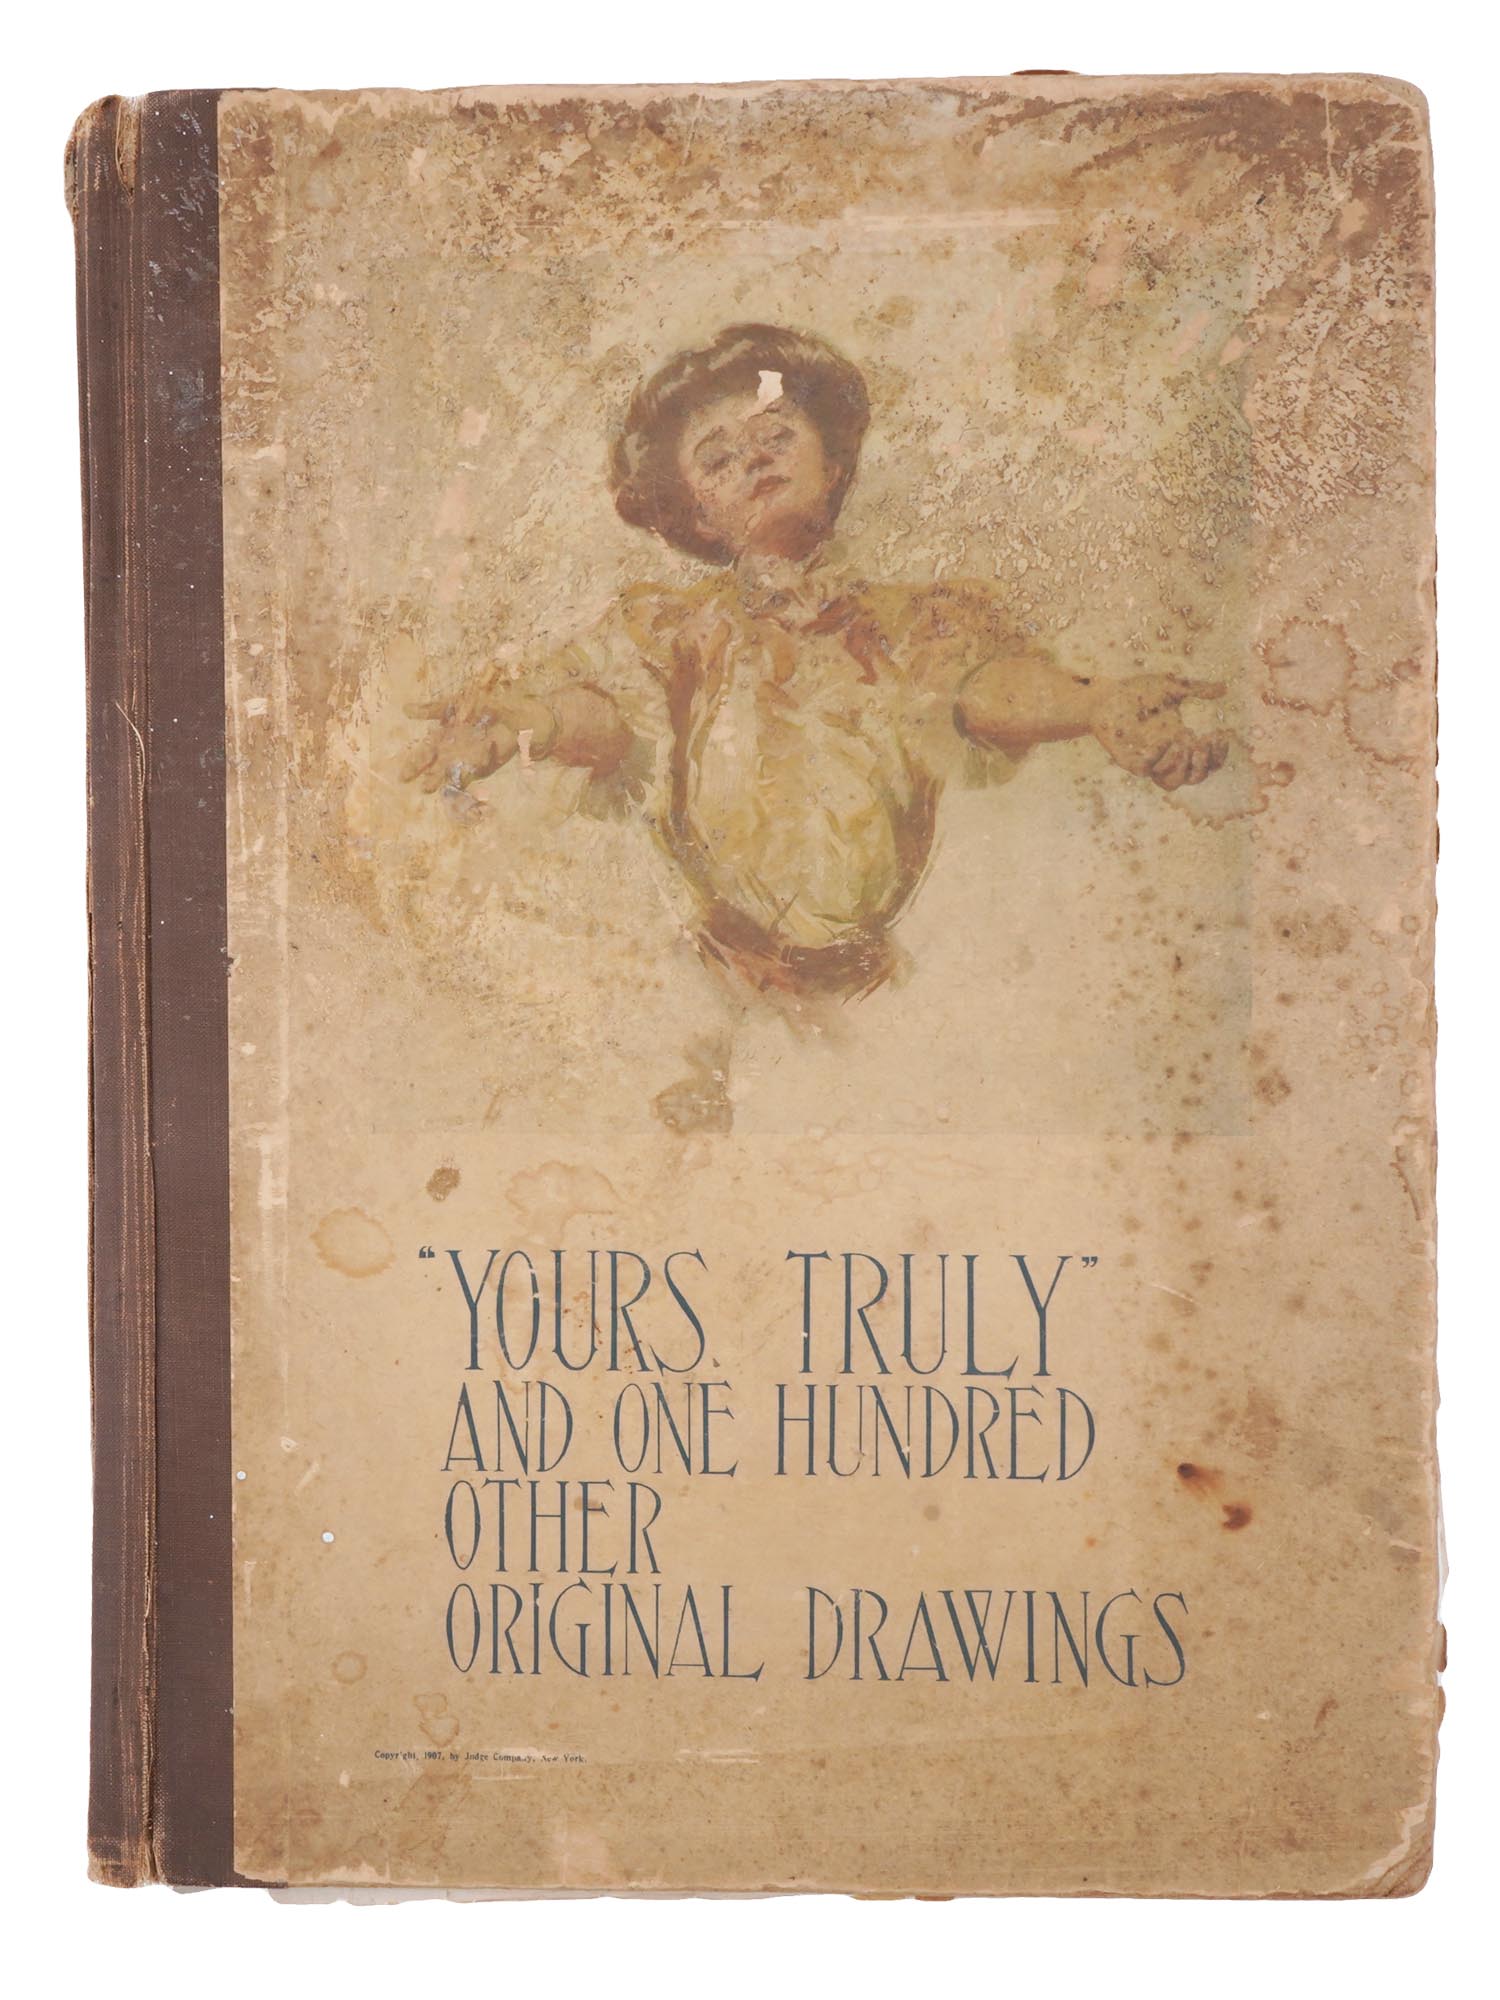 ANTIQUE YOURS TRULY ONE HUNDRED ORIGINAL DRAWING BOOK